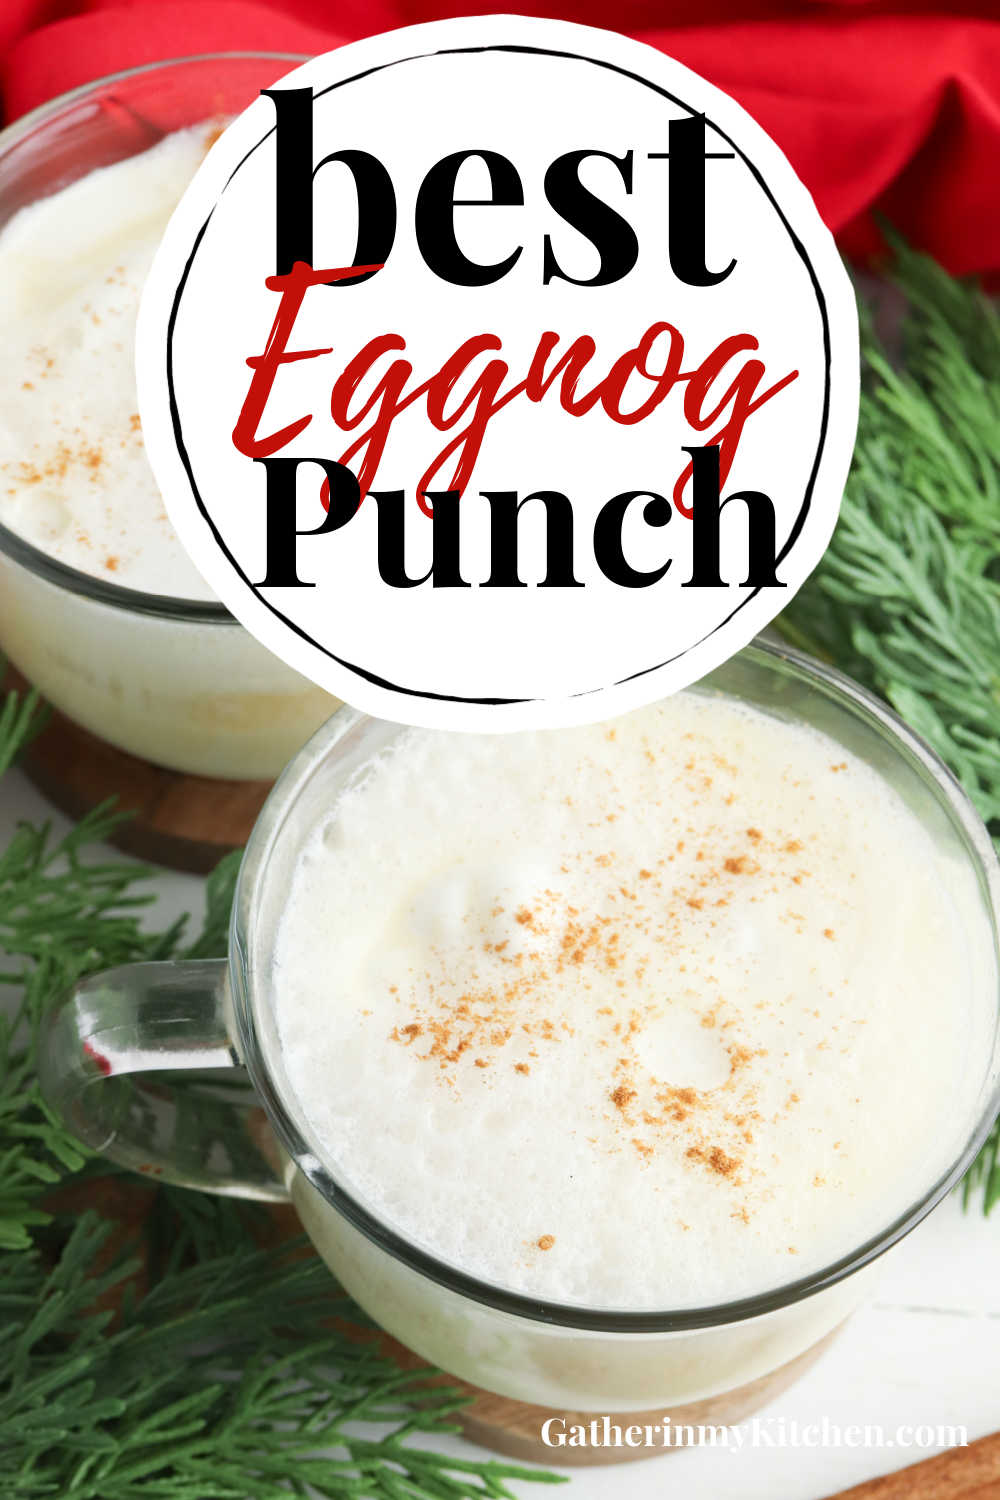 Pic of eggnog punch on bottom, top has a circle with "Best eggnog punch" in it.